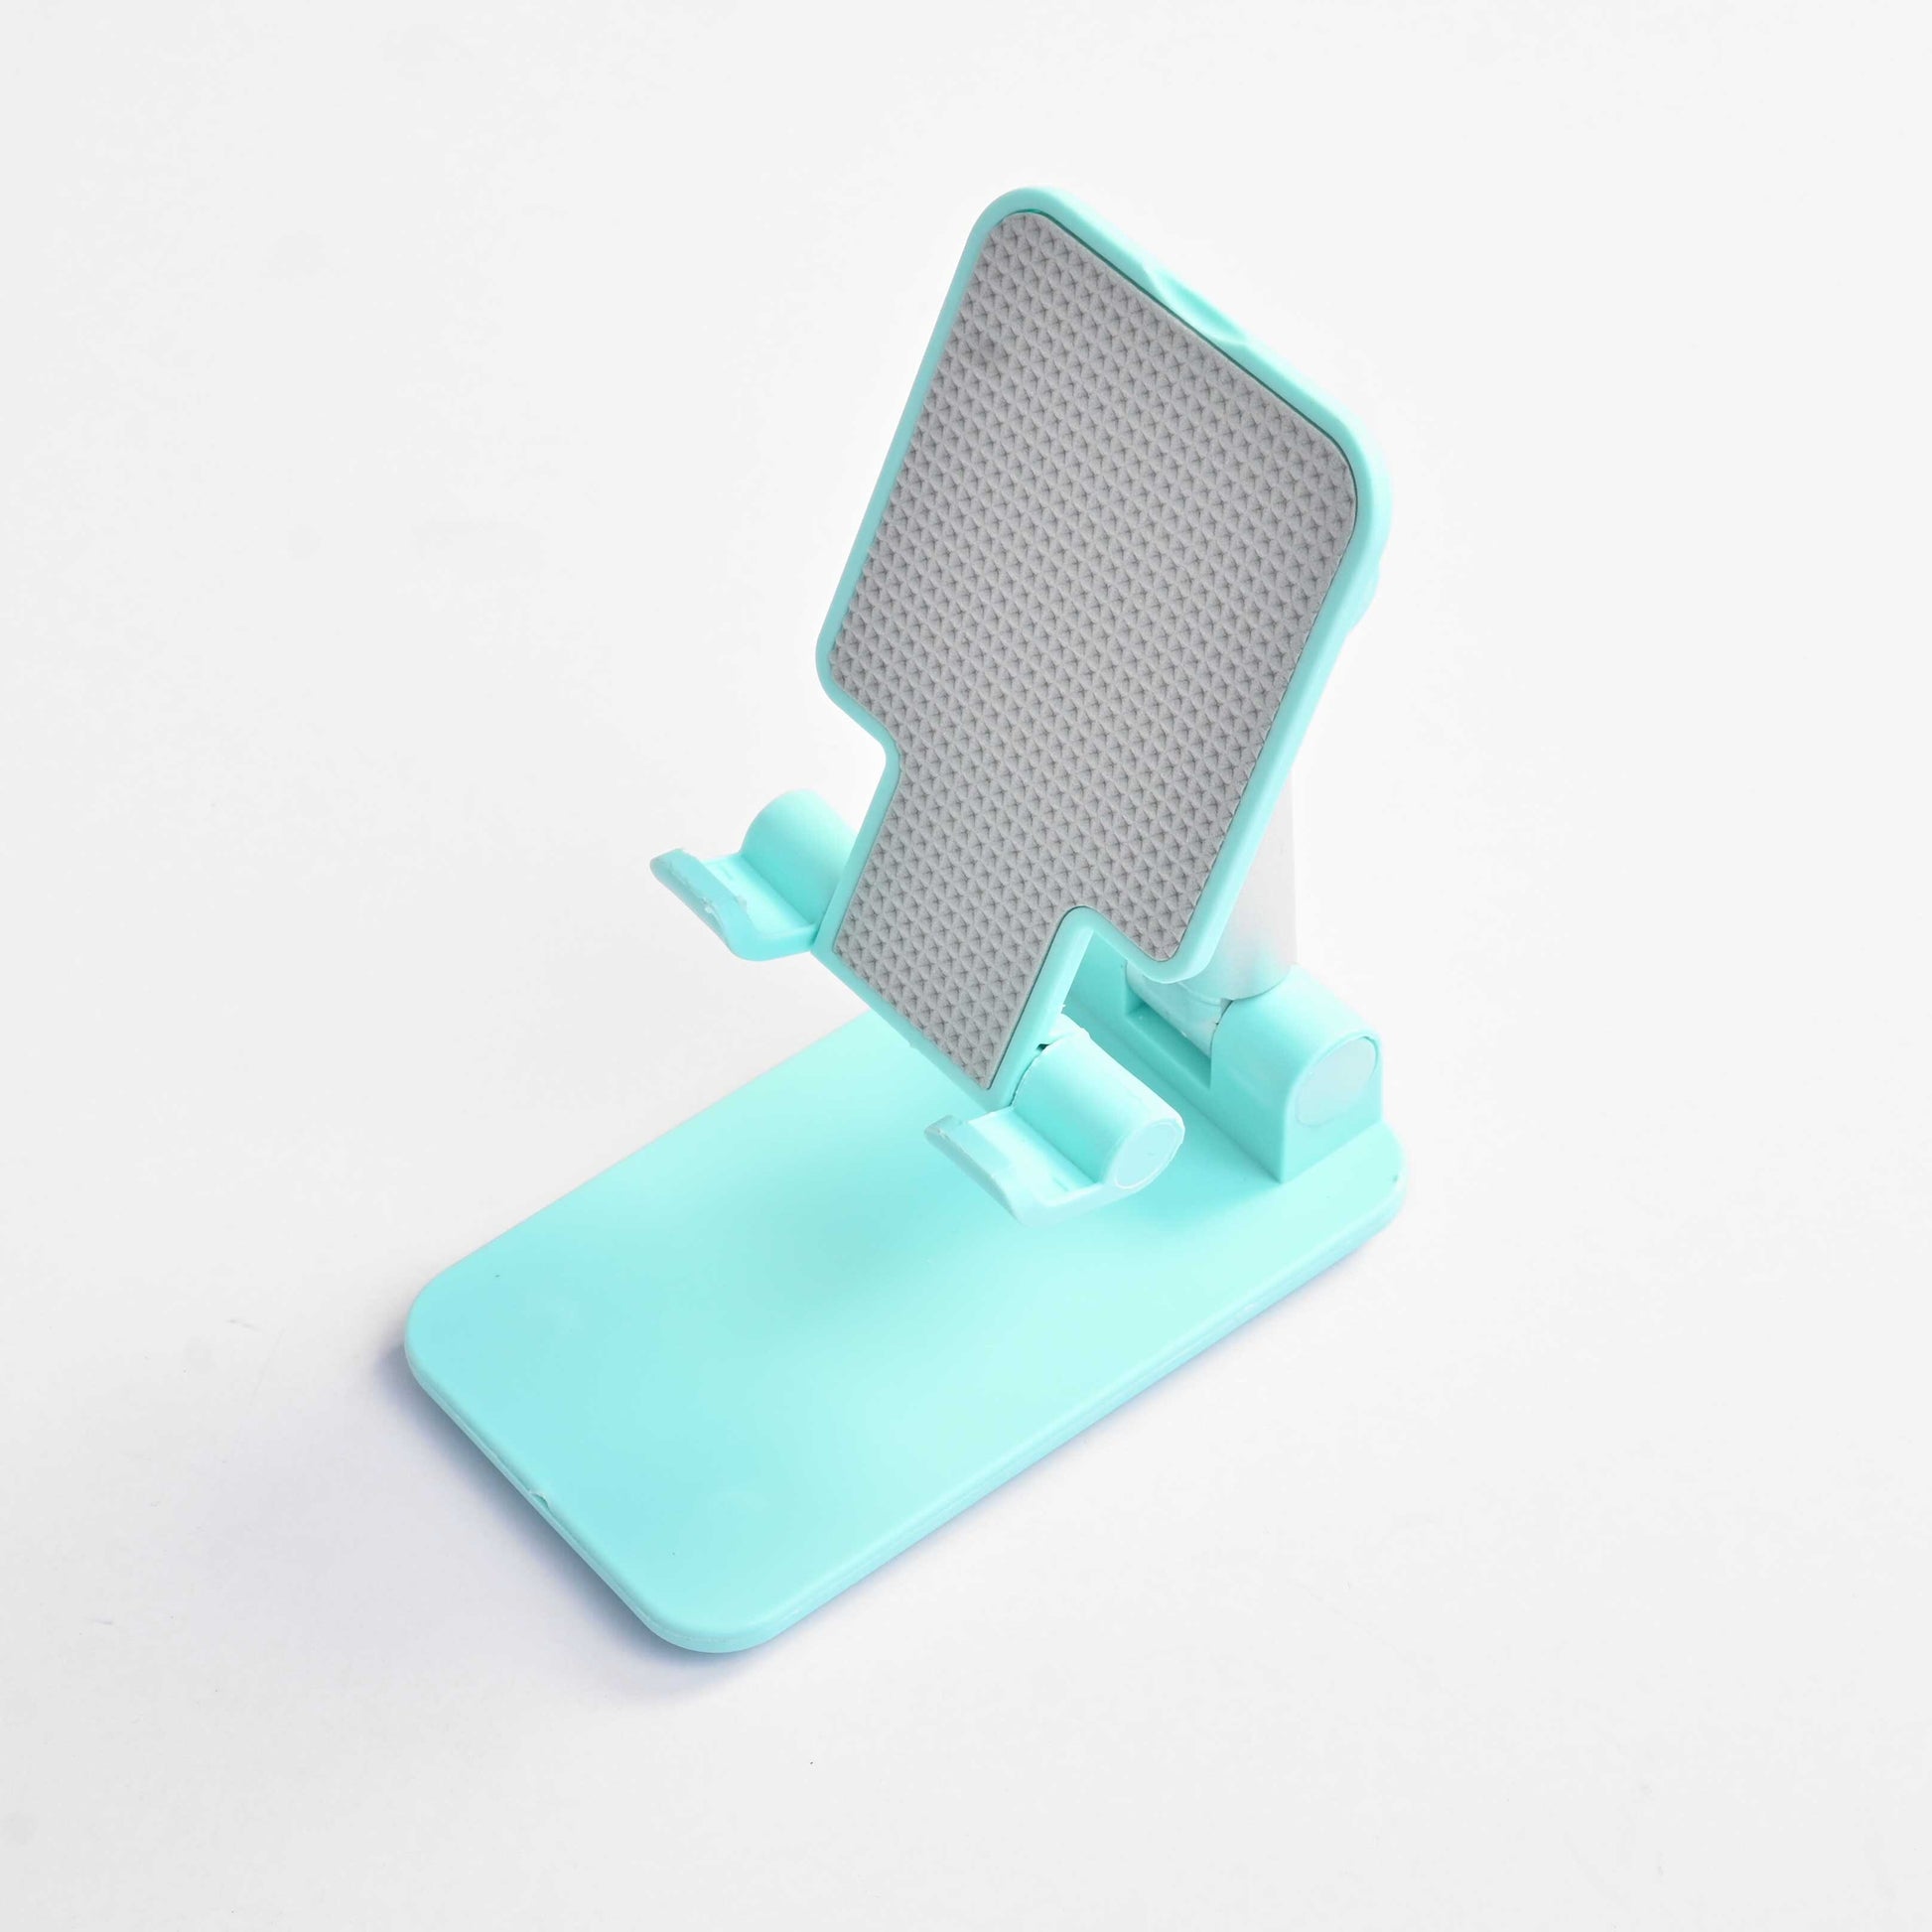 Toowoomba Folding Desktop Phone Stand Mobile Accessories SDQ Turquoise 